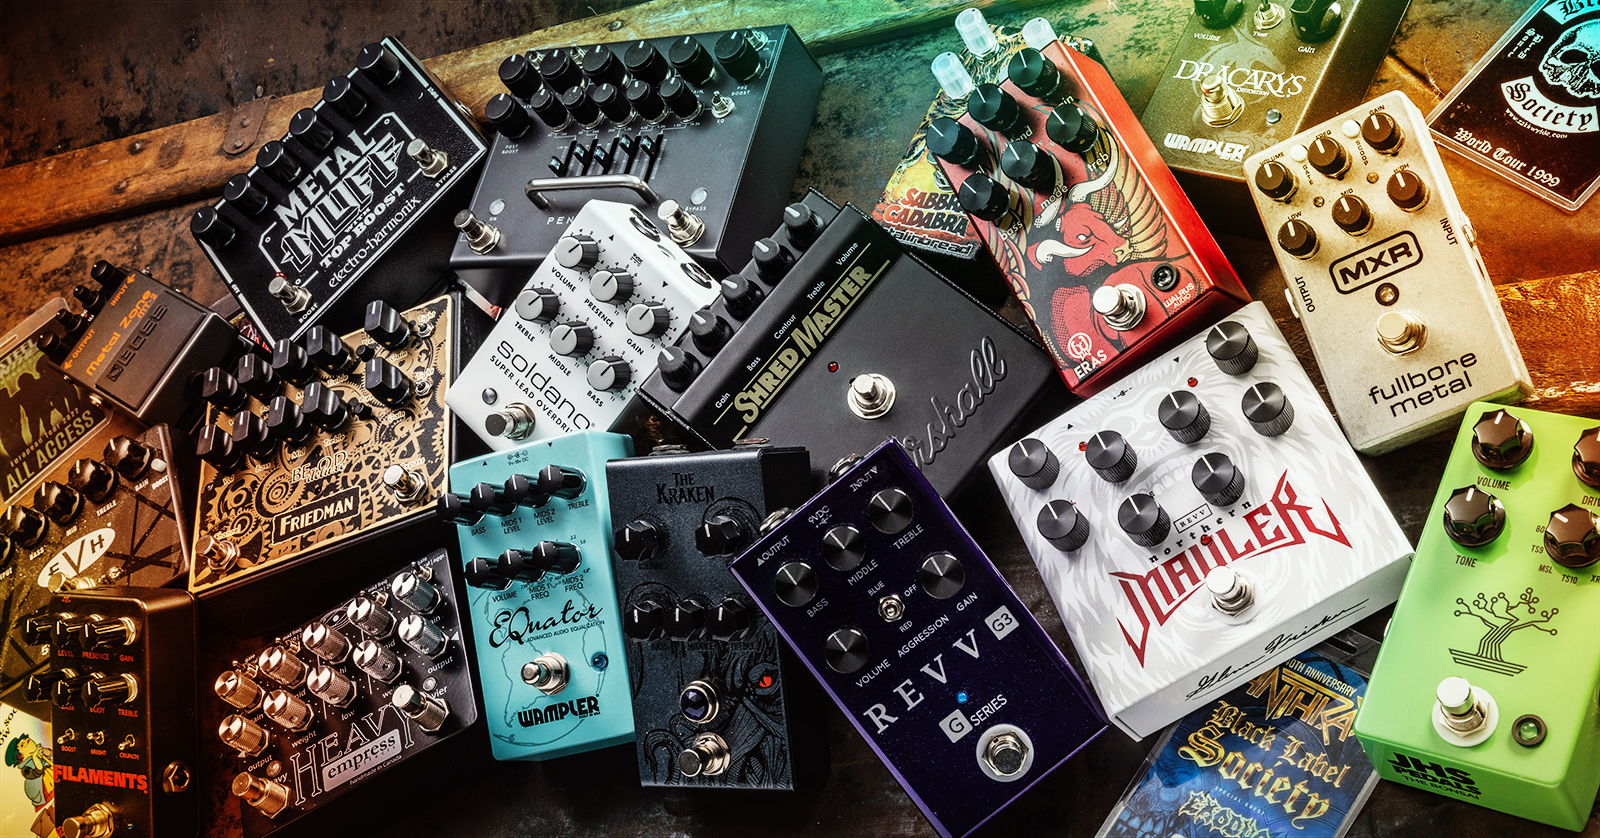 20 Best Distortion Pedals for Metal